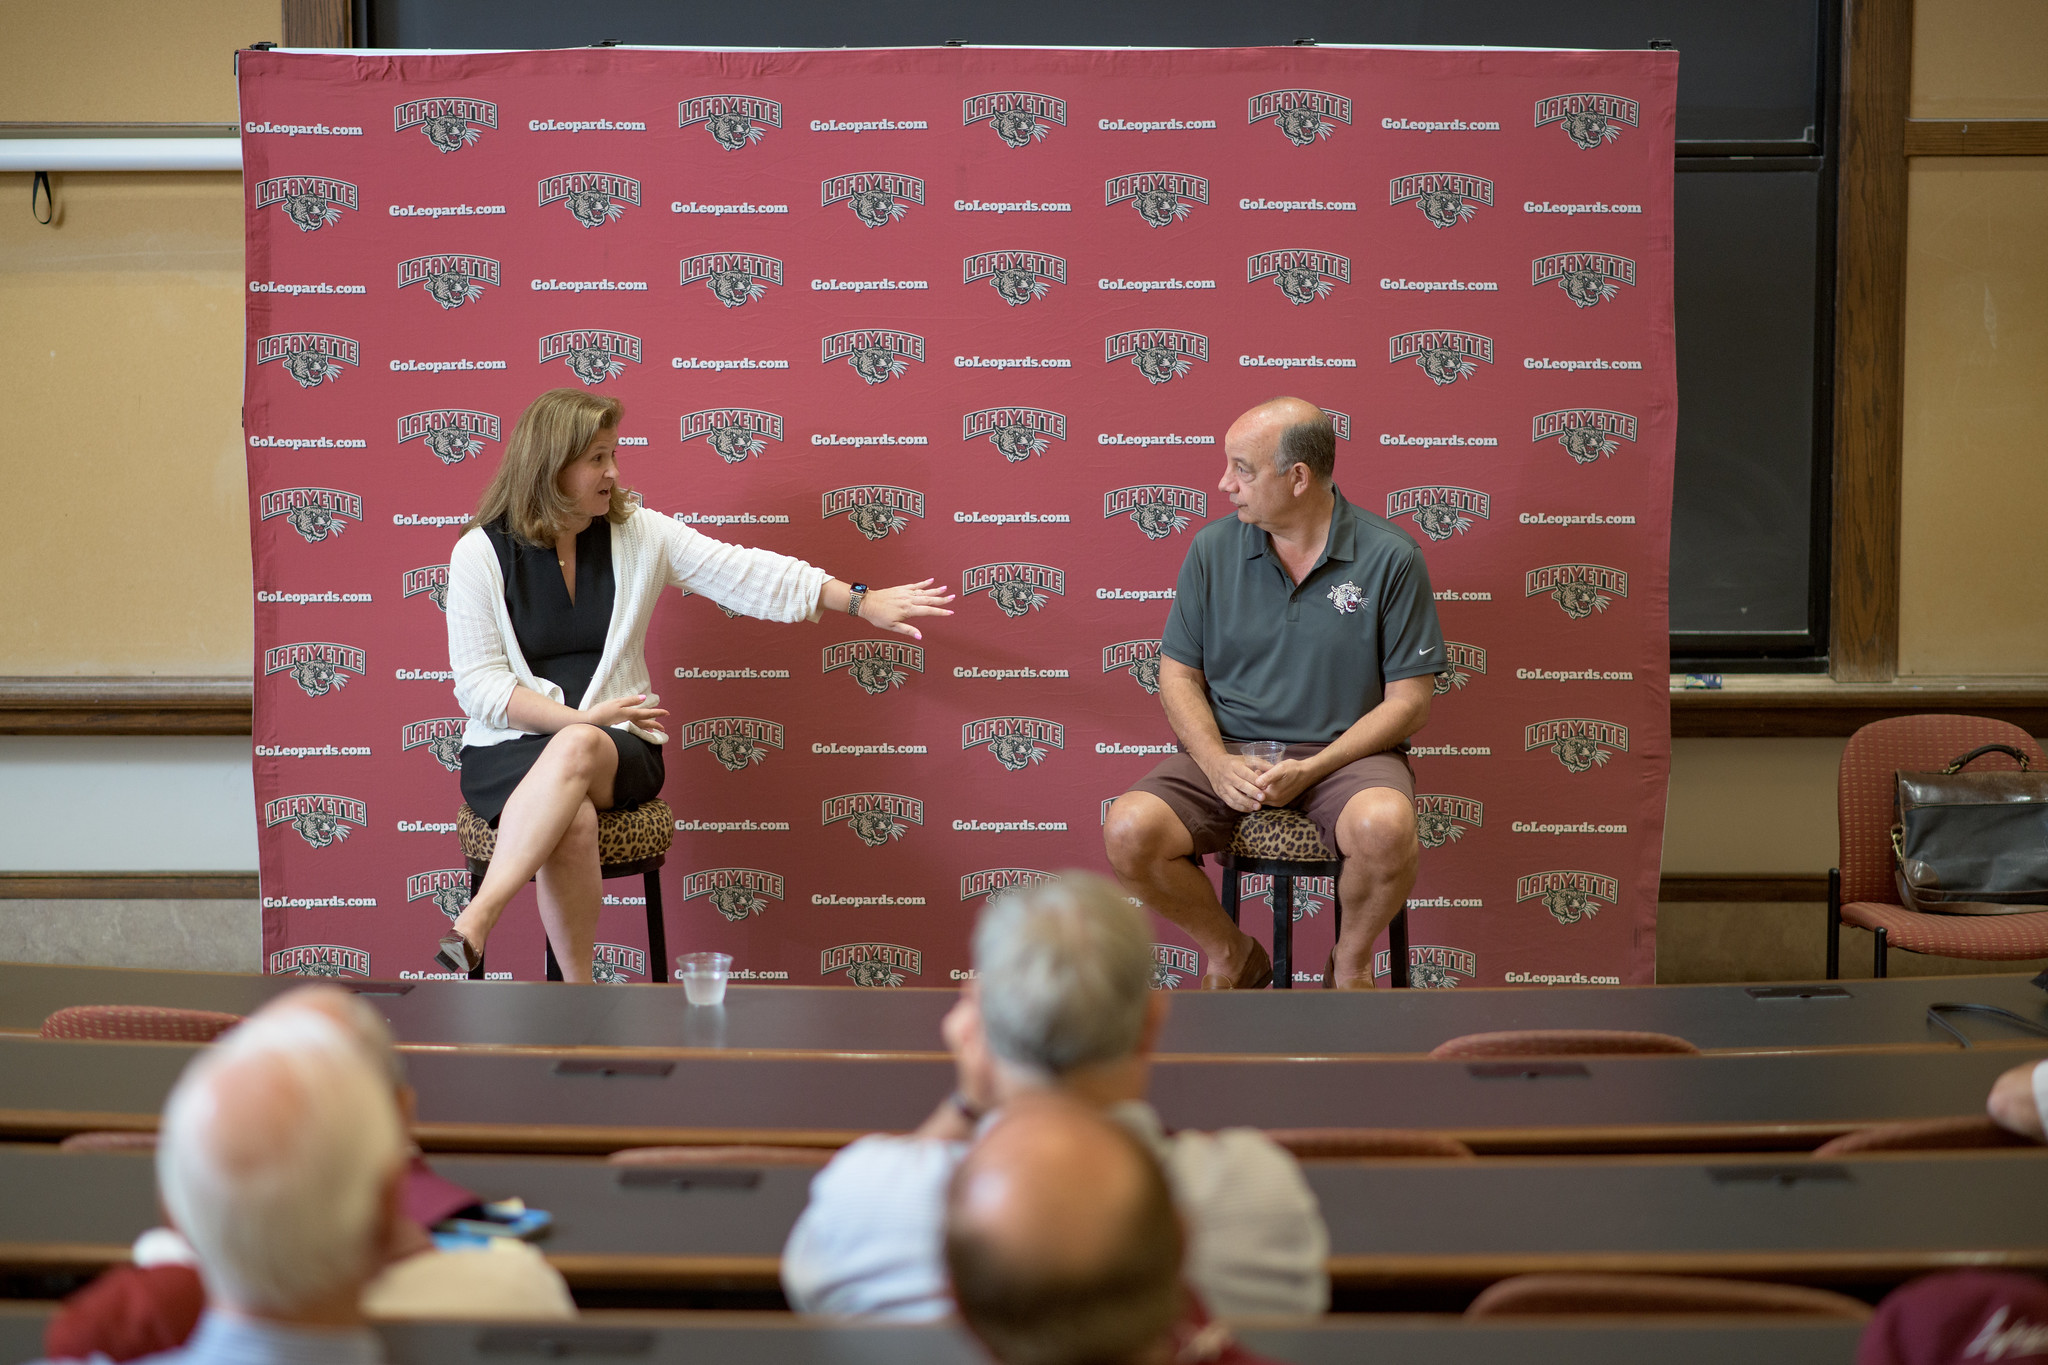 Nicole Farmer Hurd sits on a stool next to Bob Sell and talk, a Lafayette backdrop is behind them in a classroom where alumni are gathered